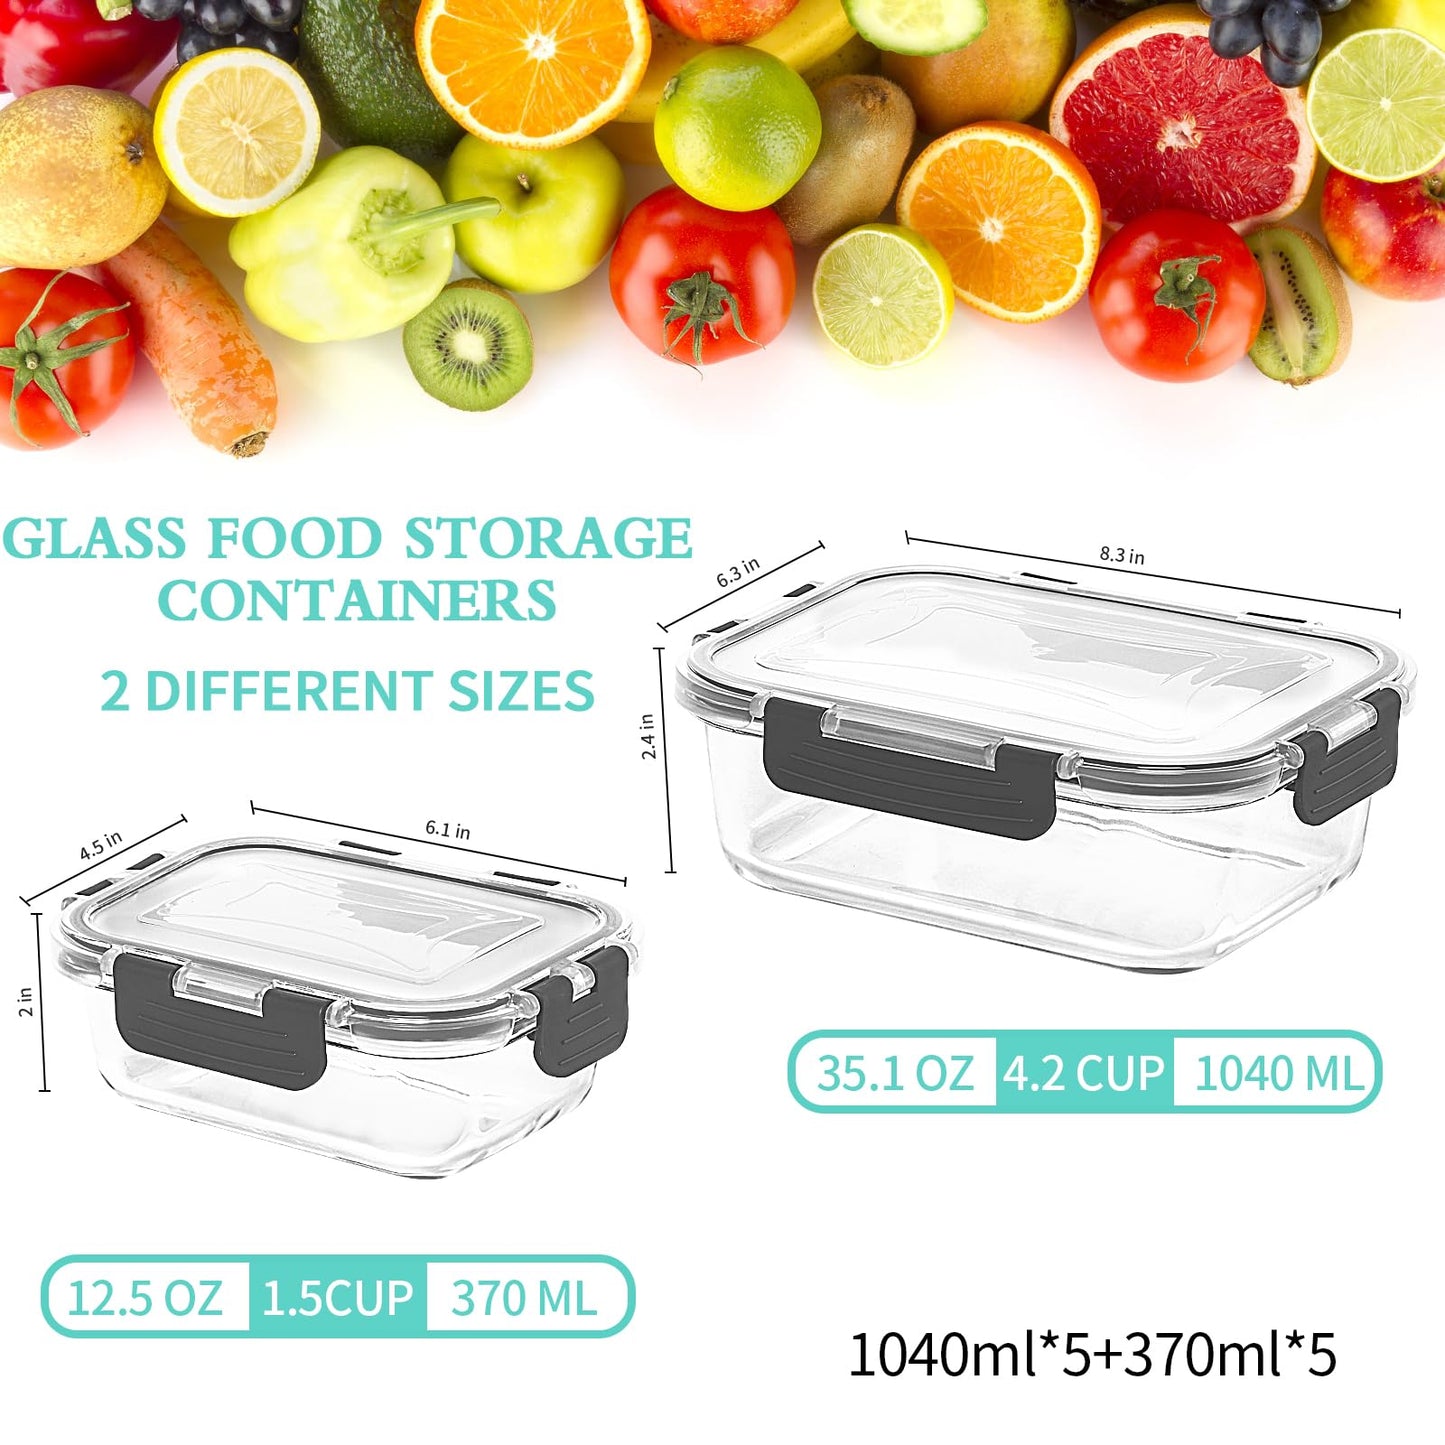 Skroam 10 Pack Glass Food Storage Containers with Lids, Glass Airtight Meal Prep Container Set for Lunch, on the Go, Leftover, Kitchen Pantry Organizers and Storage, BPA Free & Leak Proof